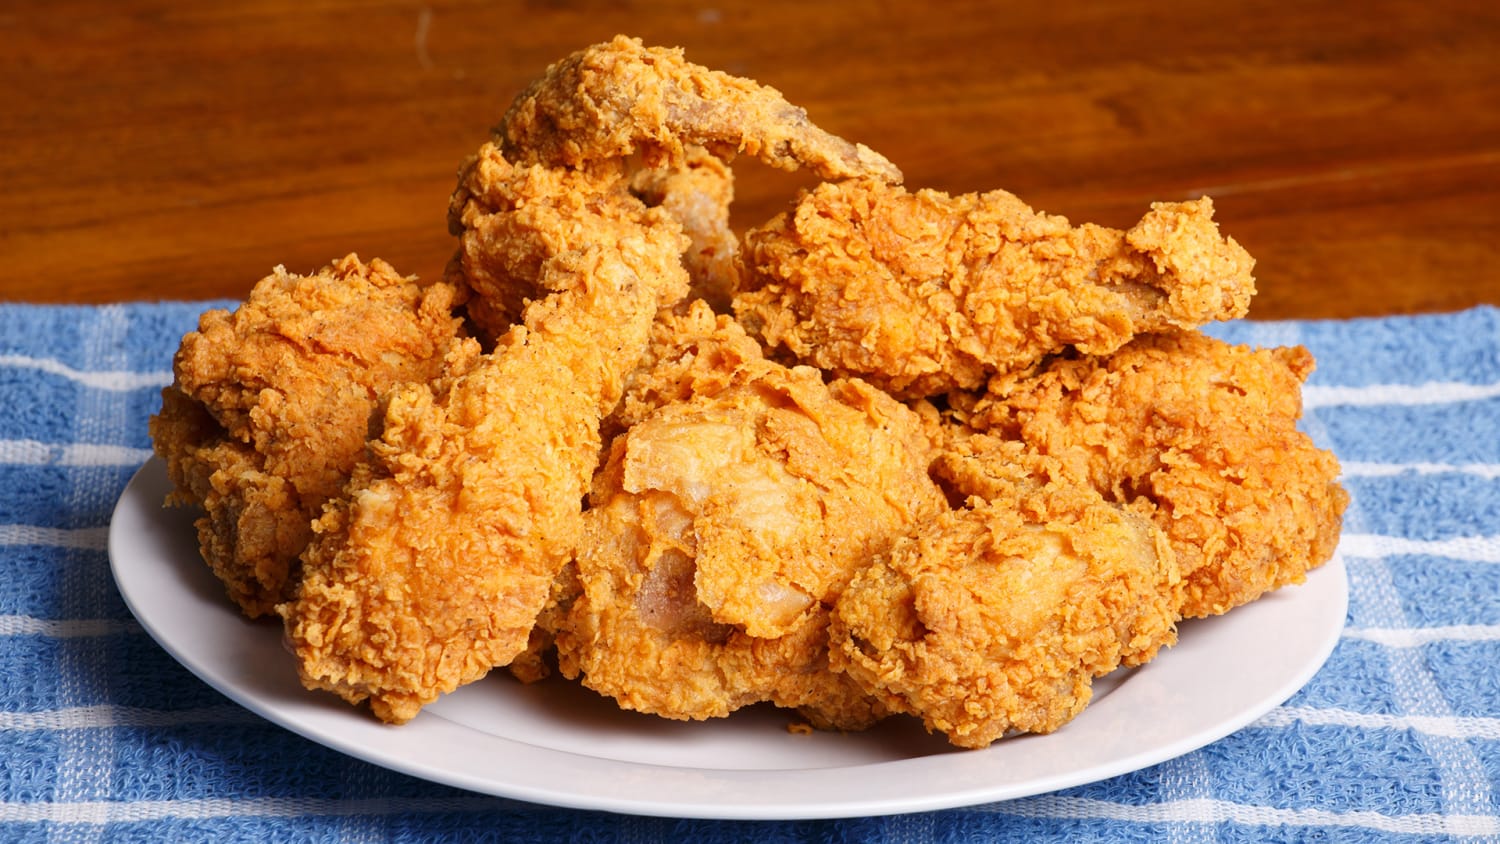 6 best tips to making crispy, southern fried chicken at home